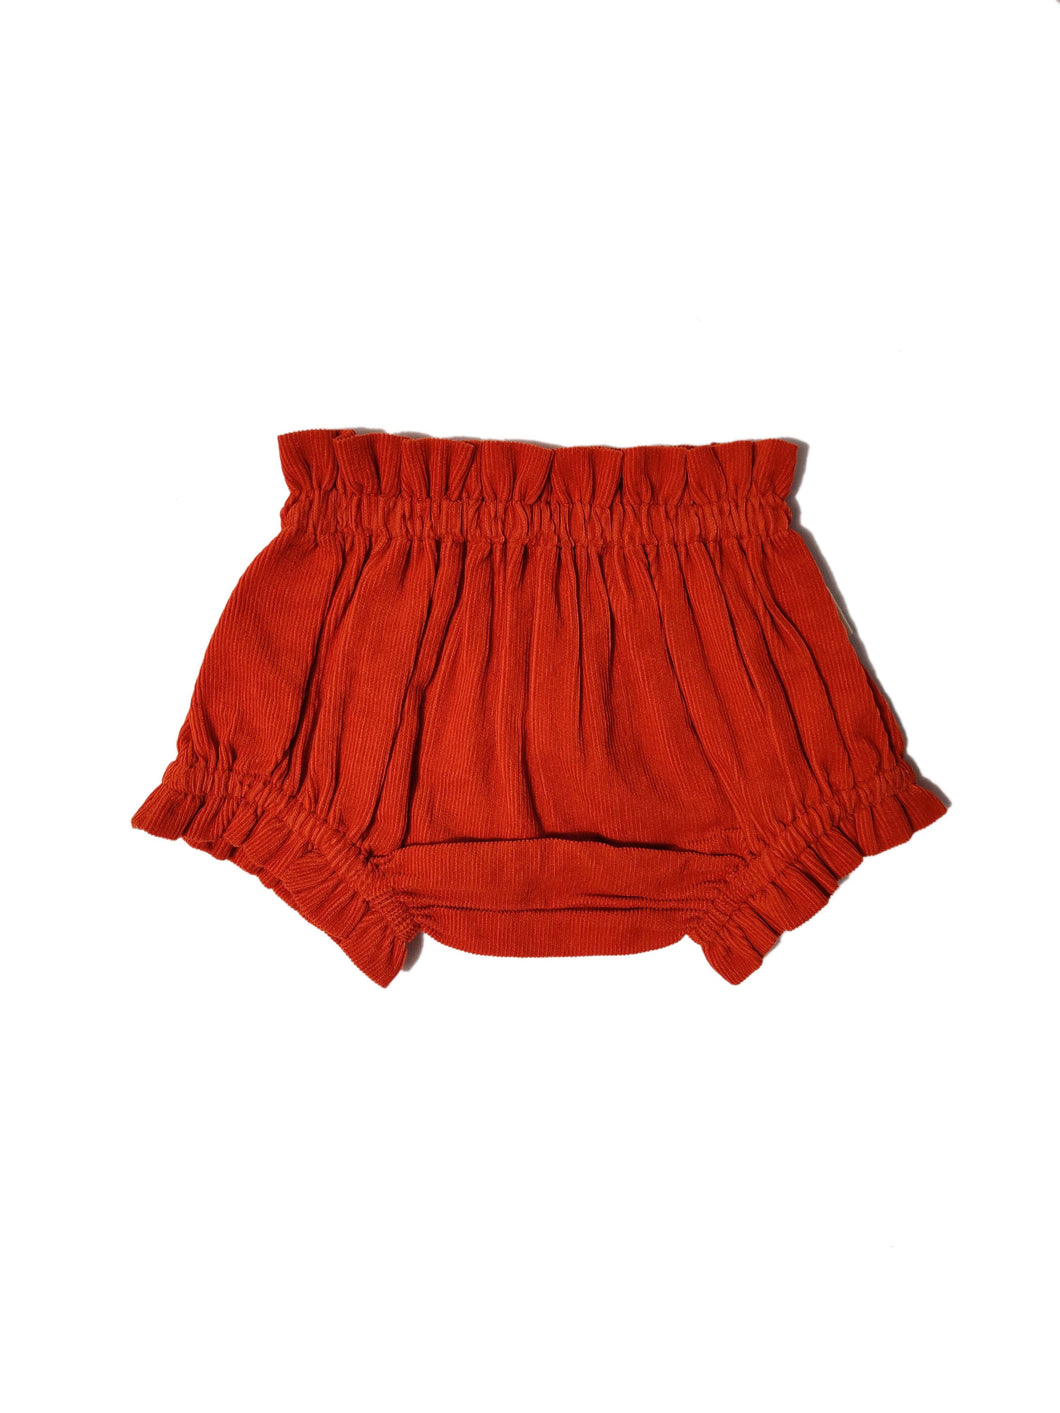 Rust Shorts-Style Corduroy Diaper Cover